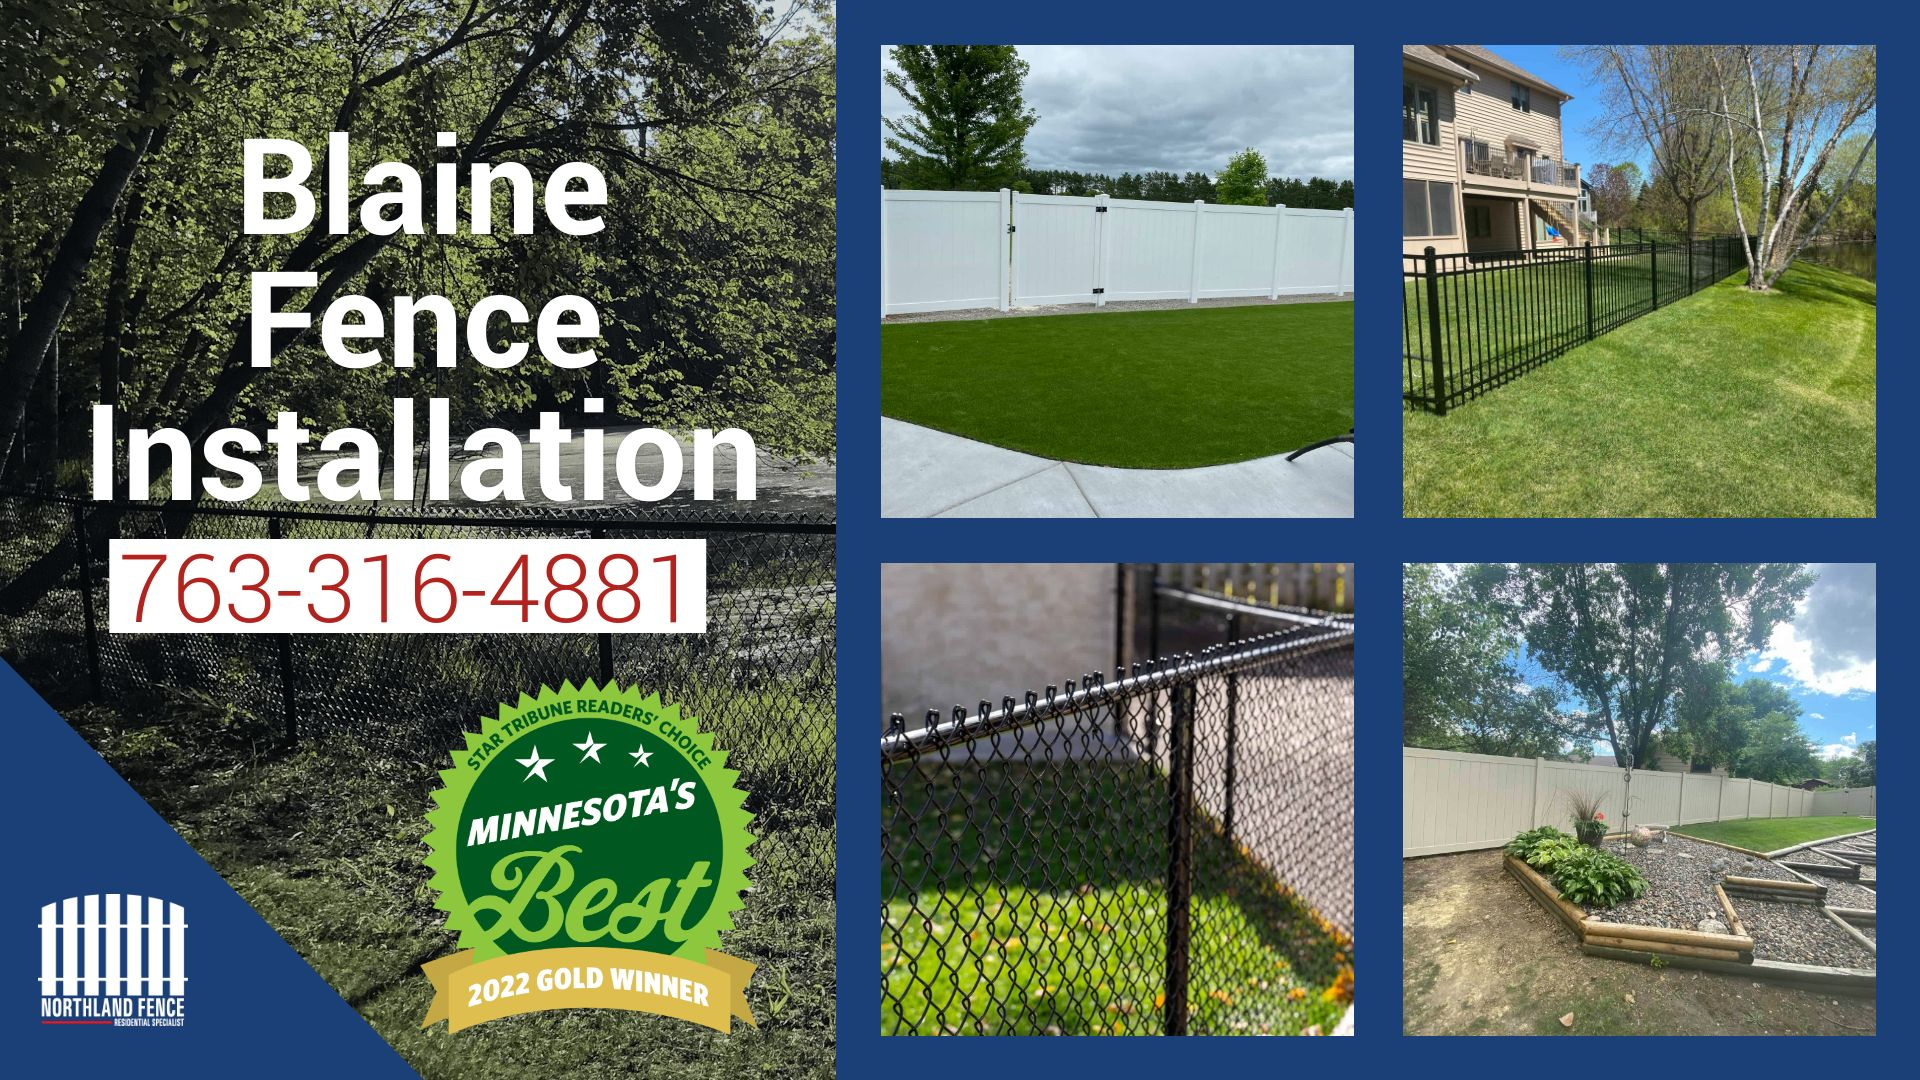 Blaine fence installation contractor